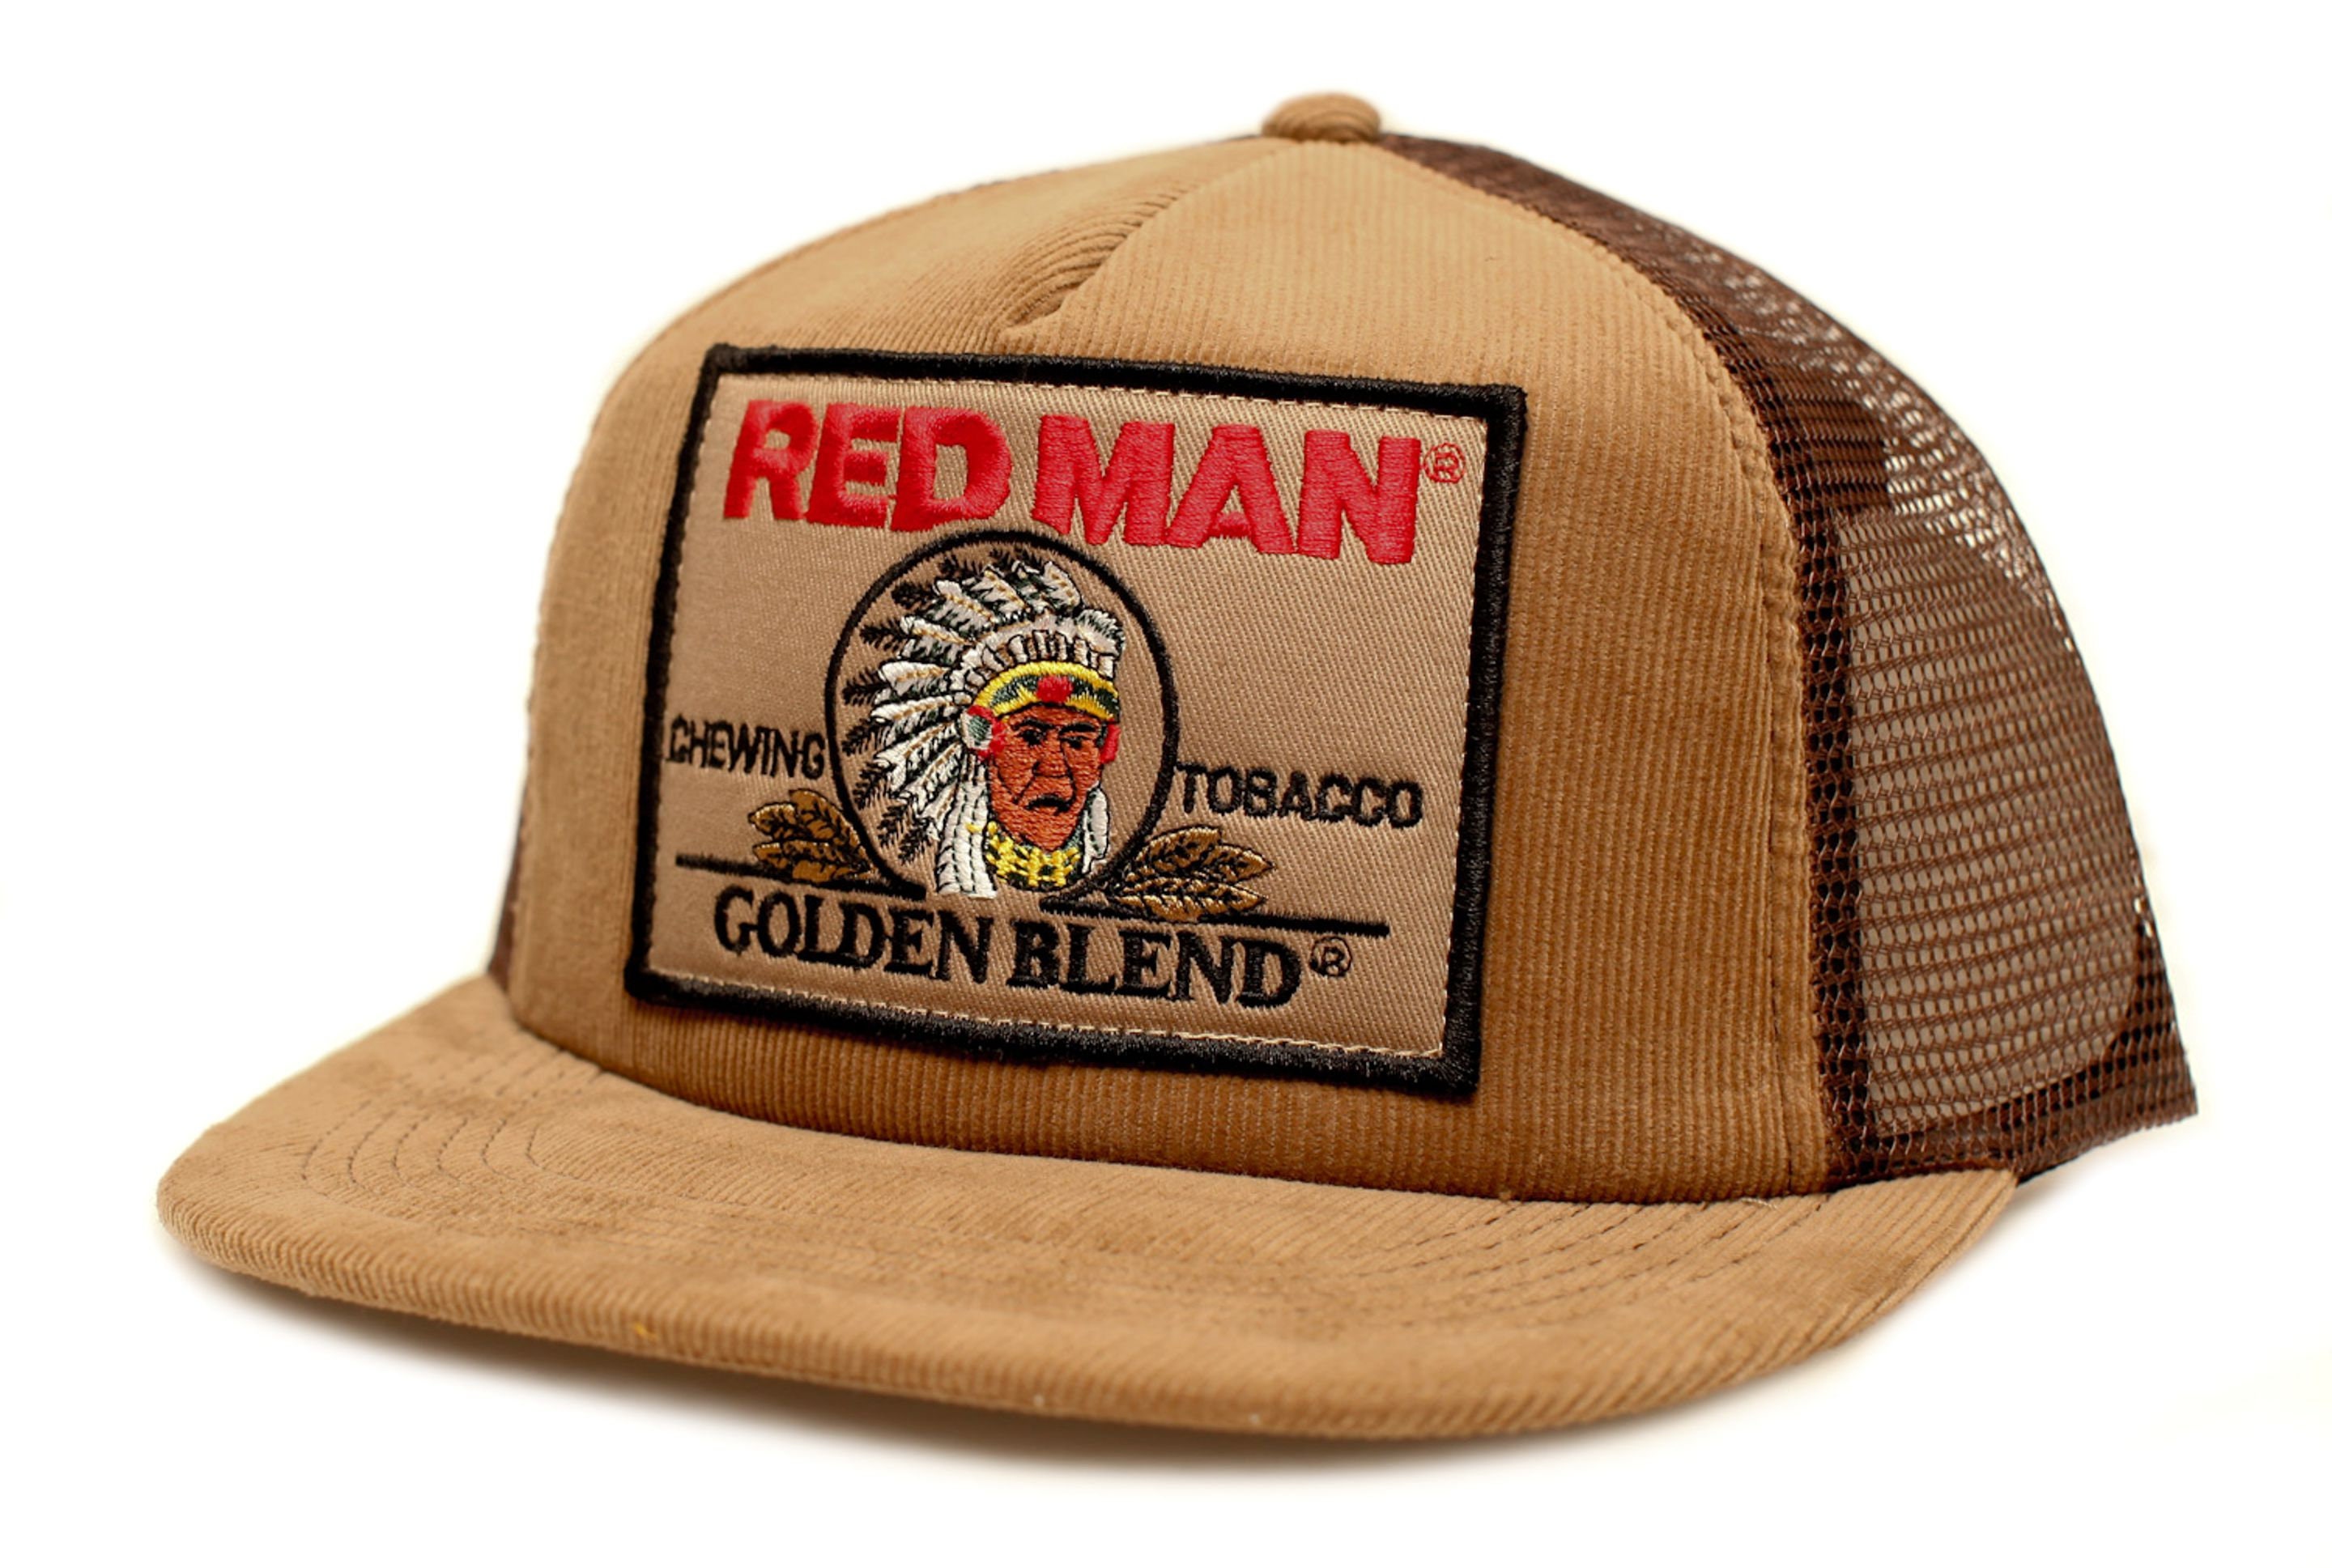 Vintage/New Red Man Chewing Tobacco Patch Truckers Hat Cap Corduroy Brown Circa 1990s